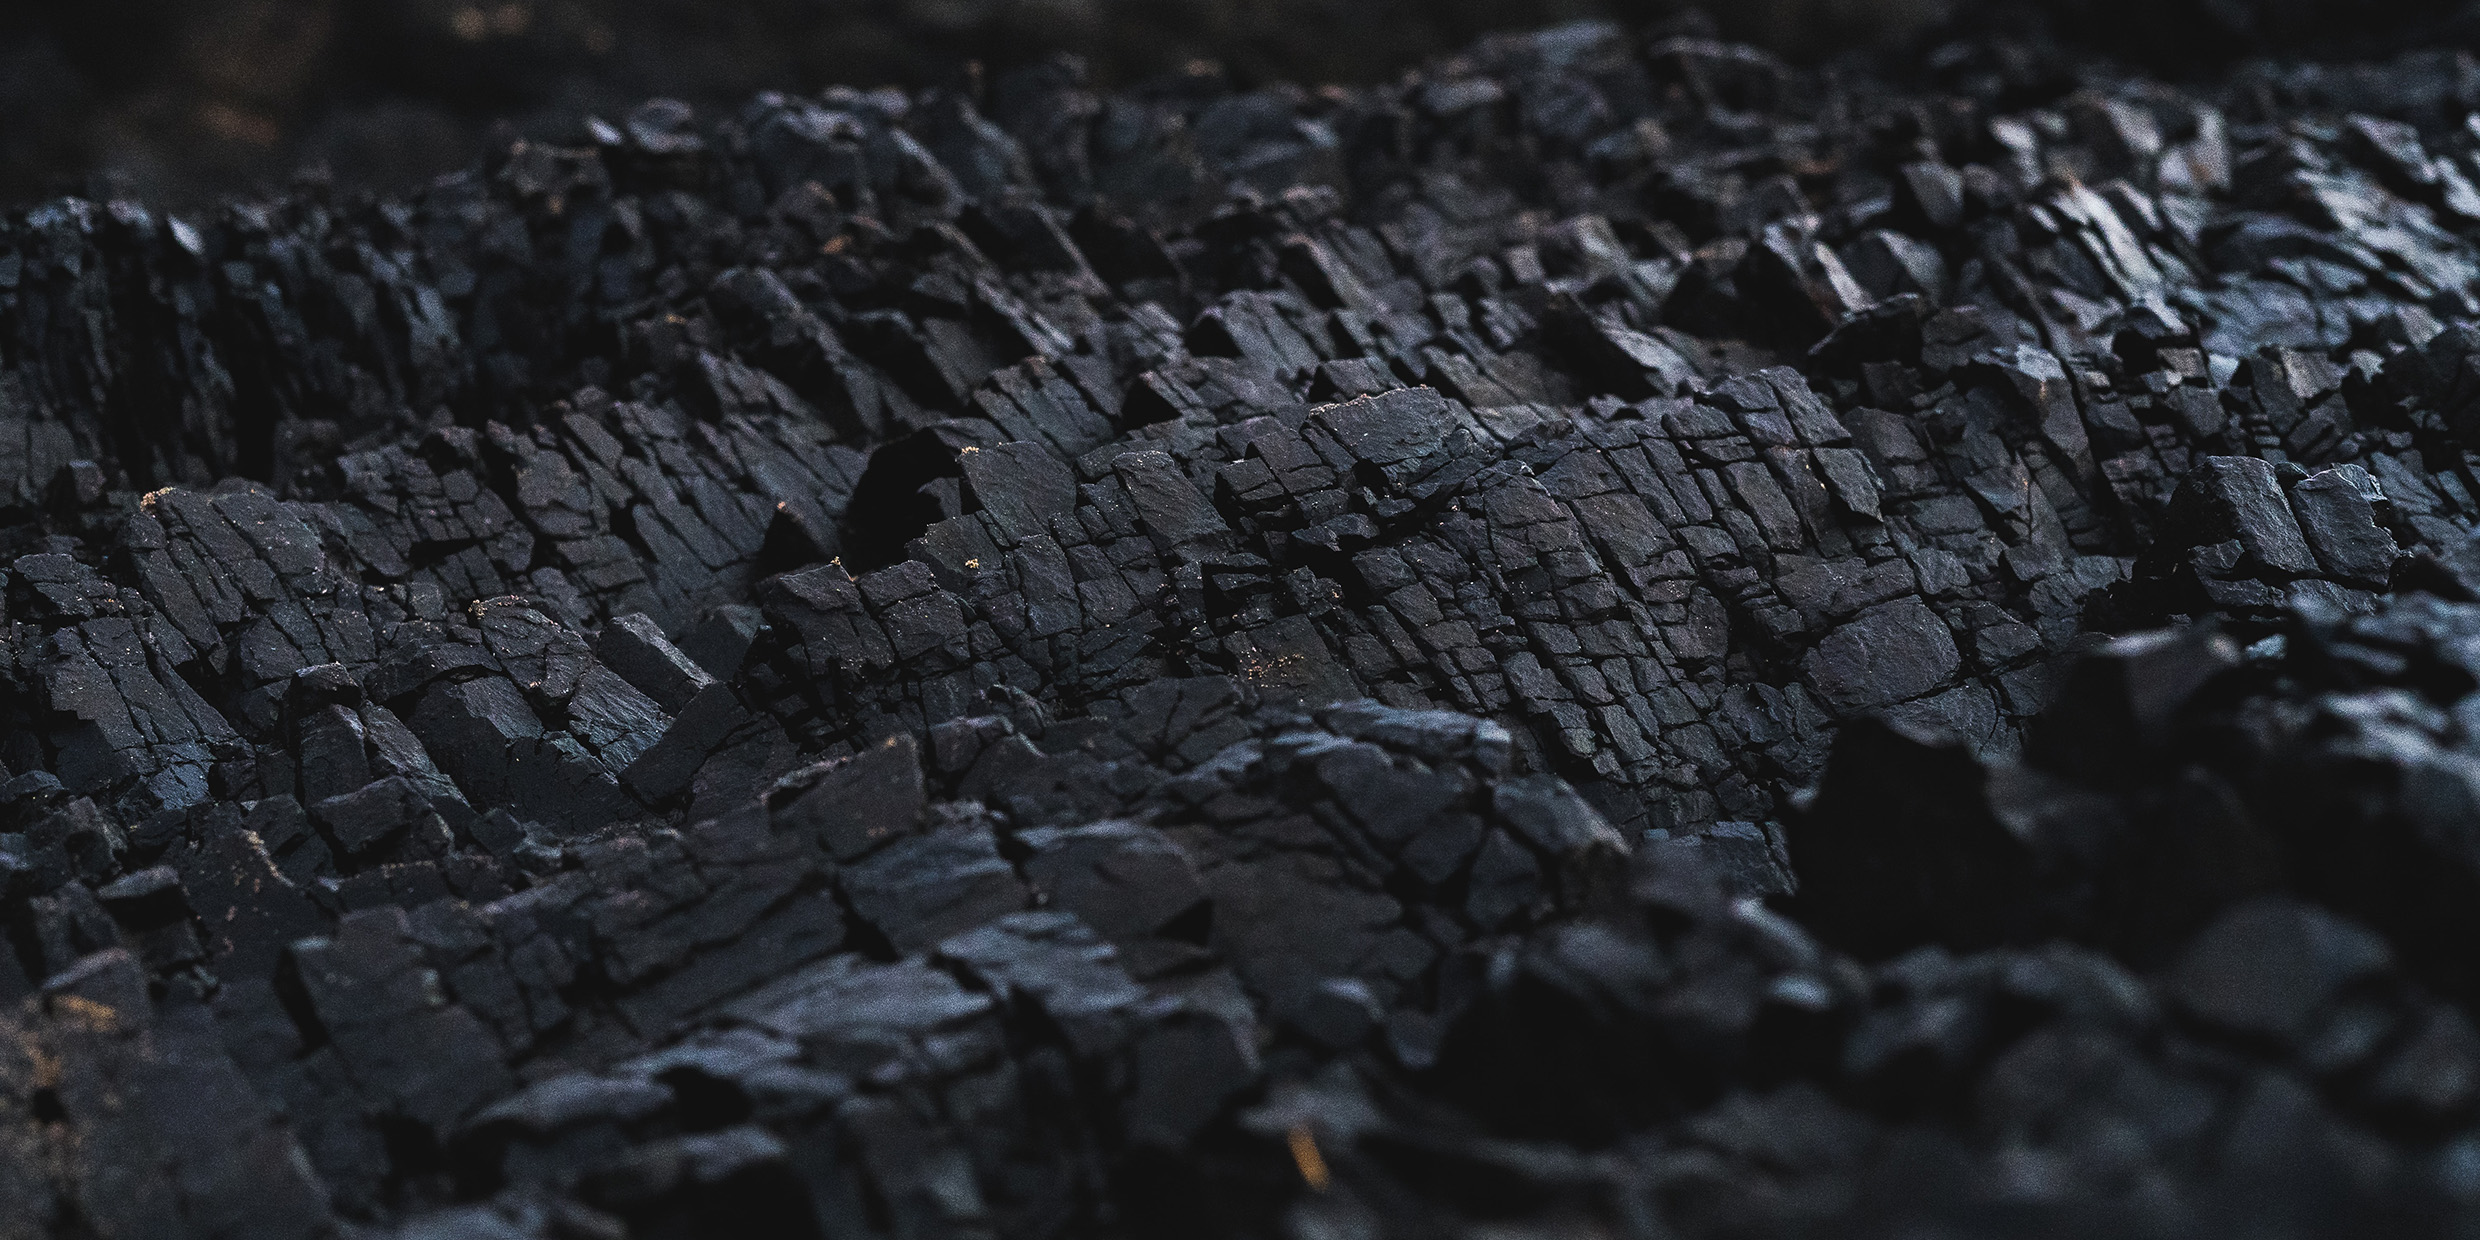 Image of coal bed